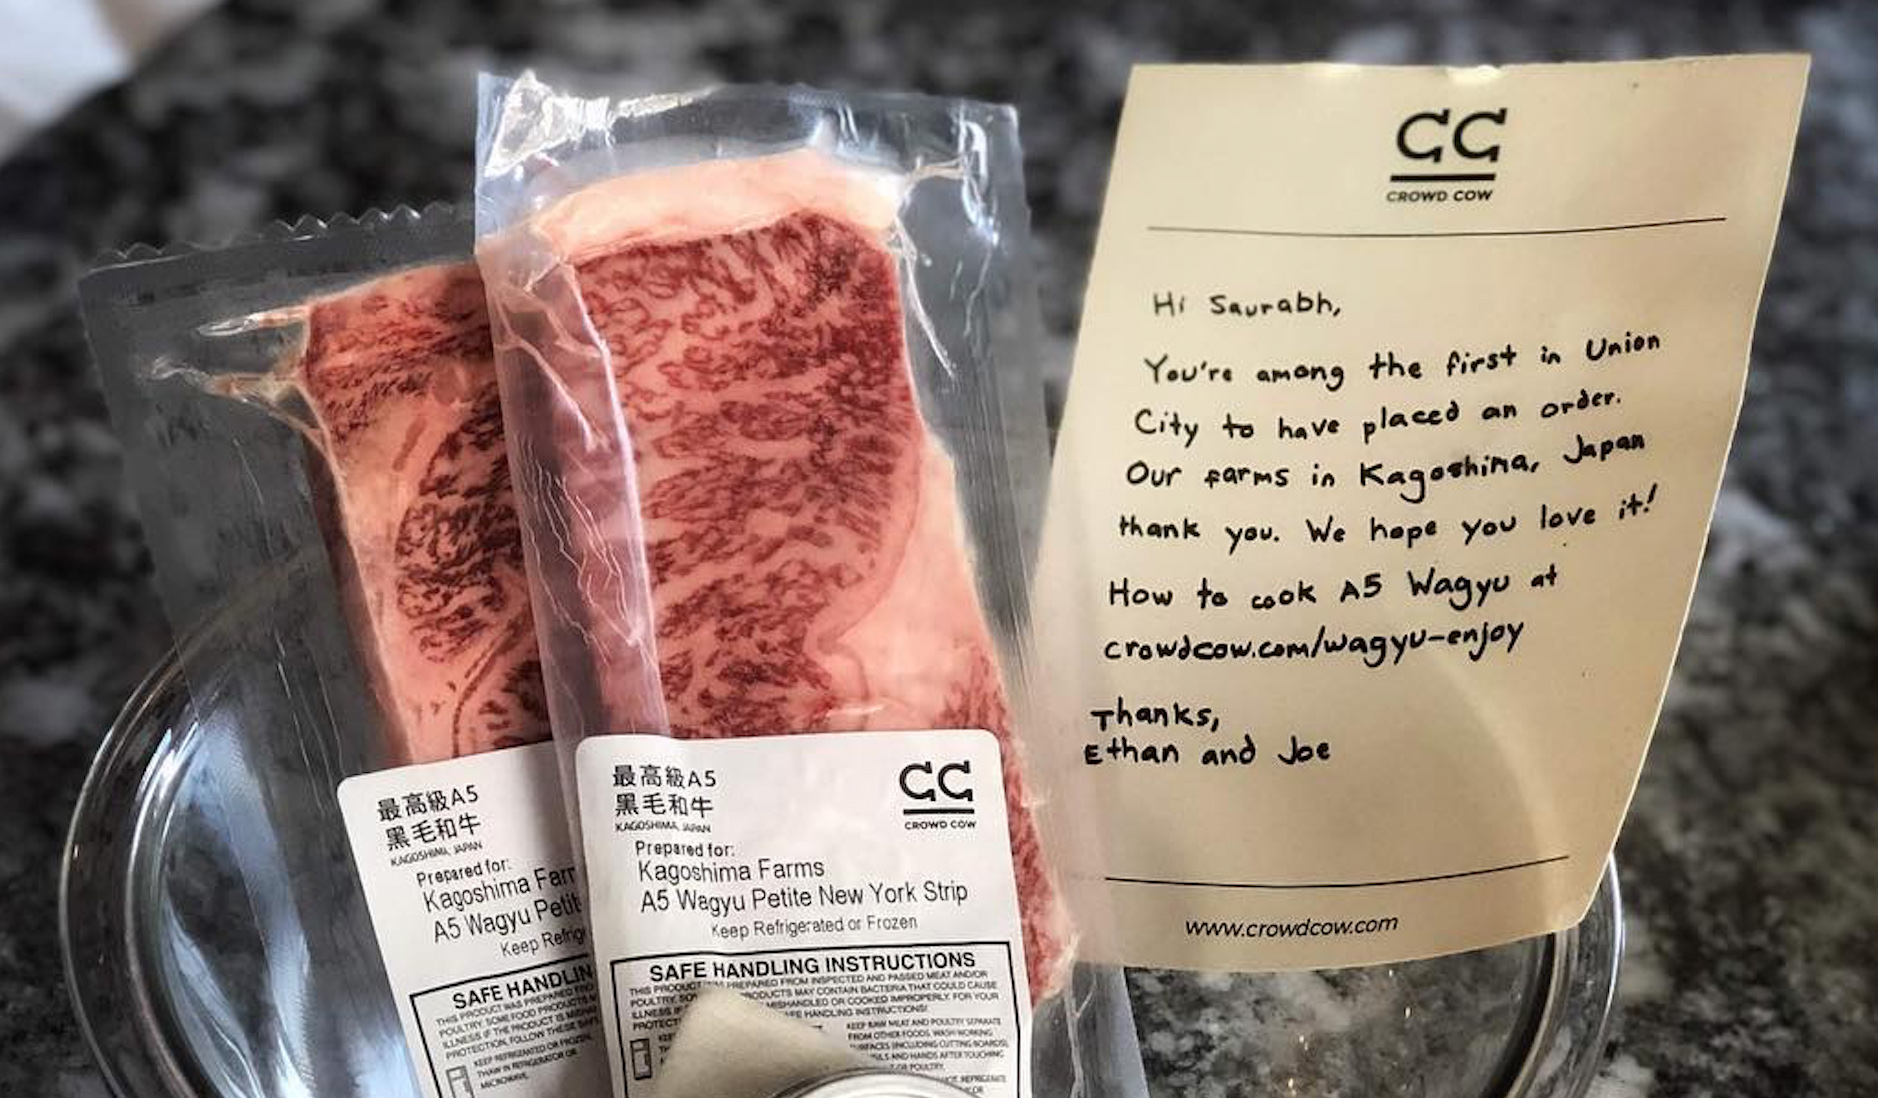 Personalized note from Crowd Cow